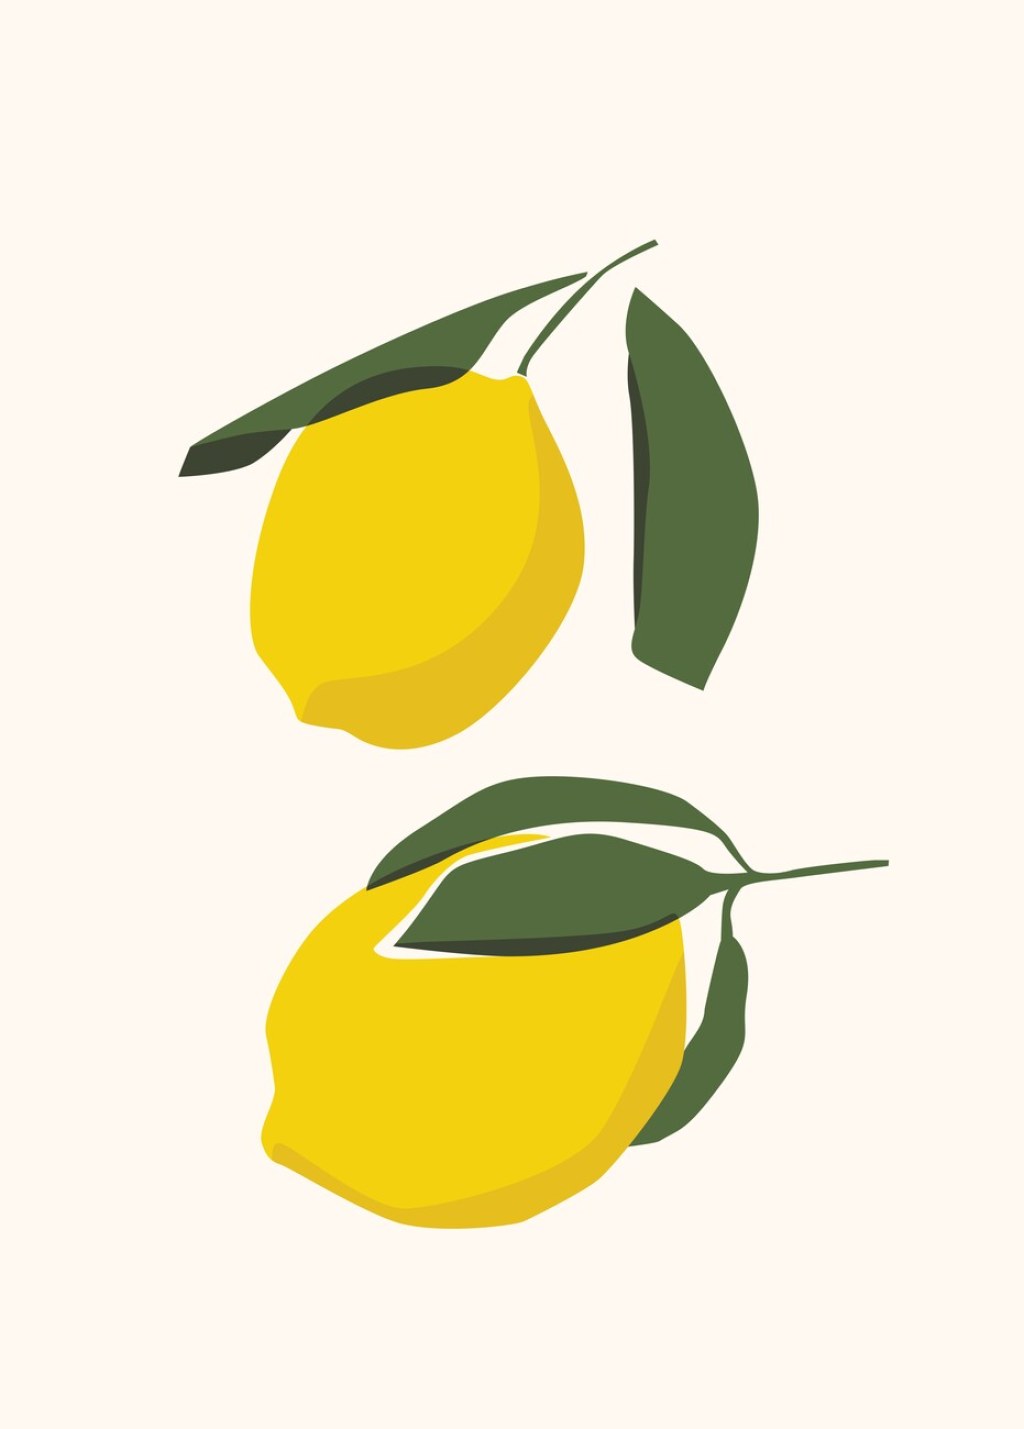 Picture of: Illustration Abstract Lemon!